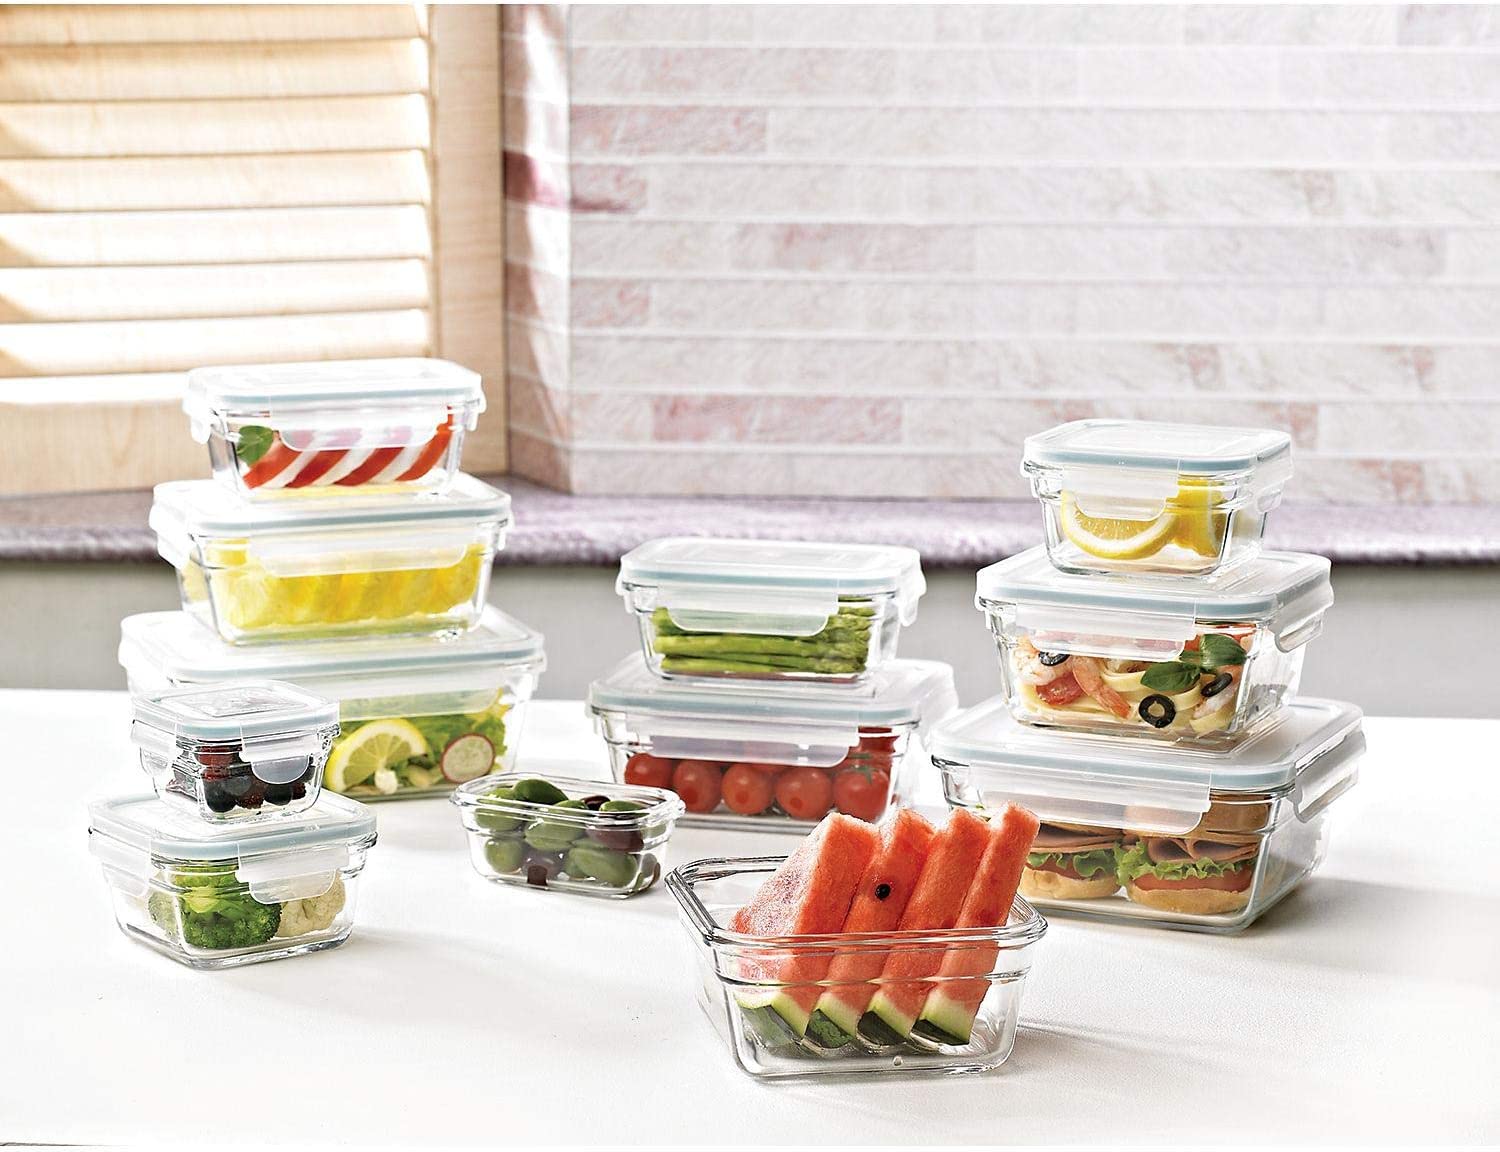 Glasslock 14 Piece Oven, Freezer, And Microwave Safe Stackable